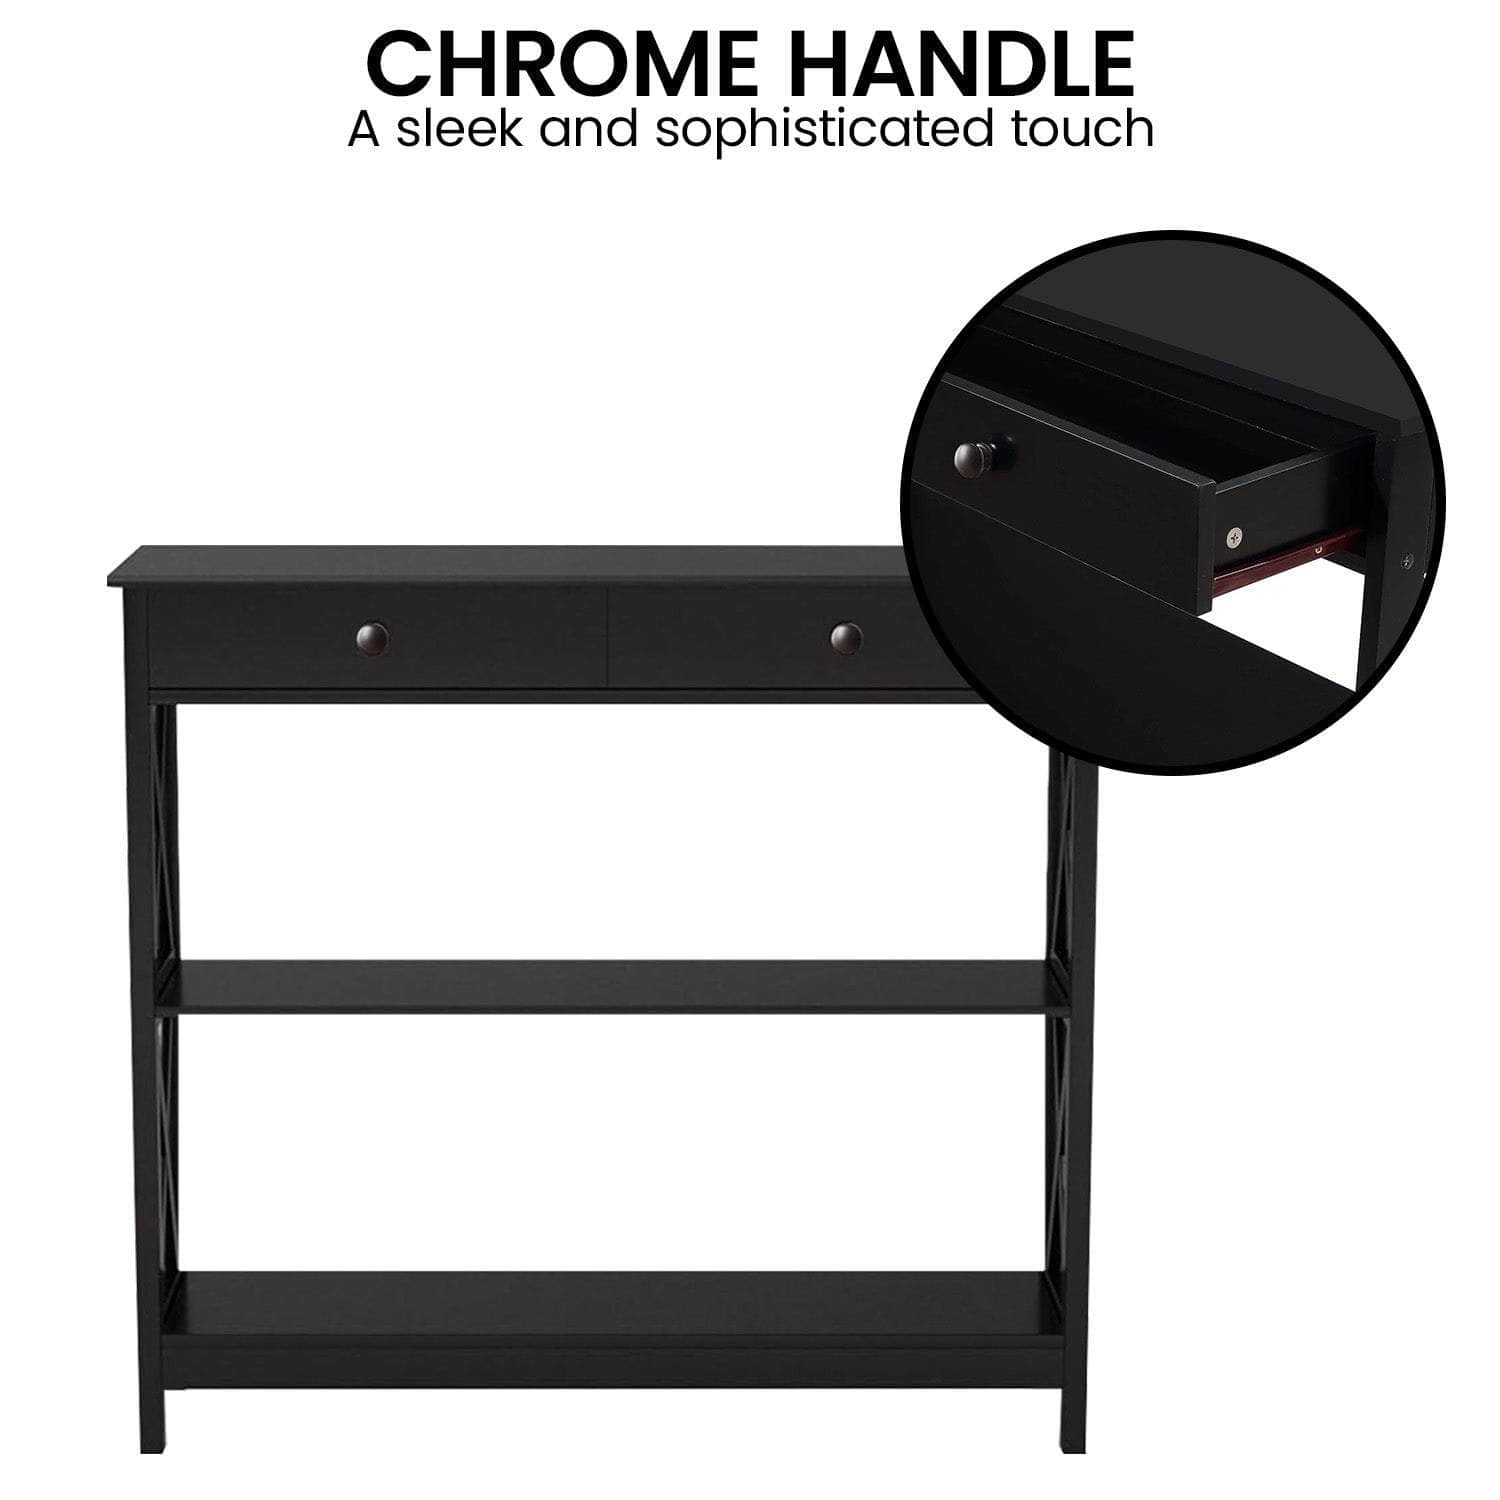 White/Black Cross Console Table for Stylish Spaces